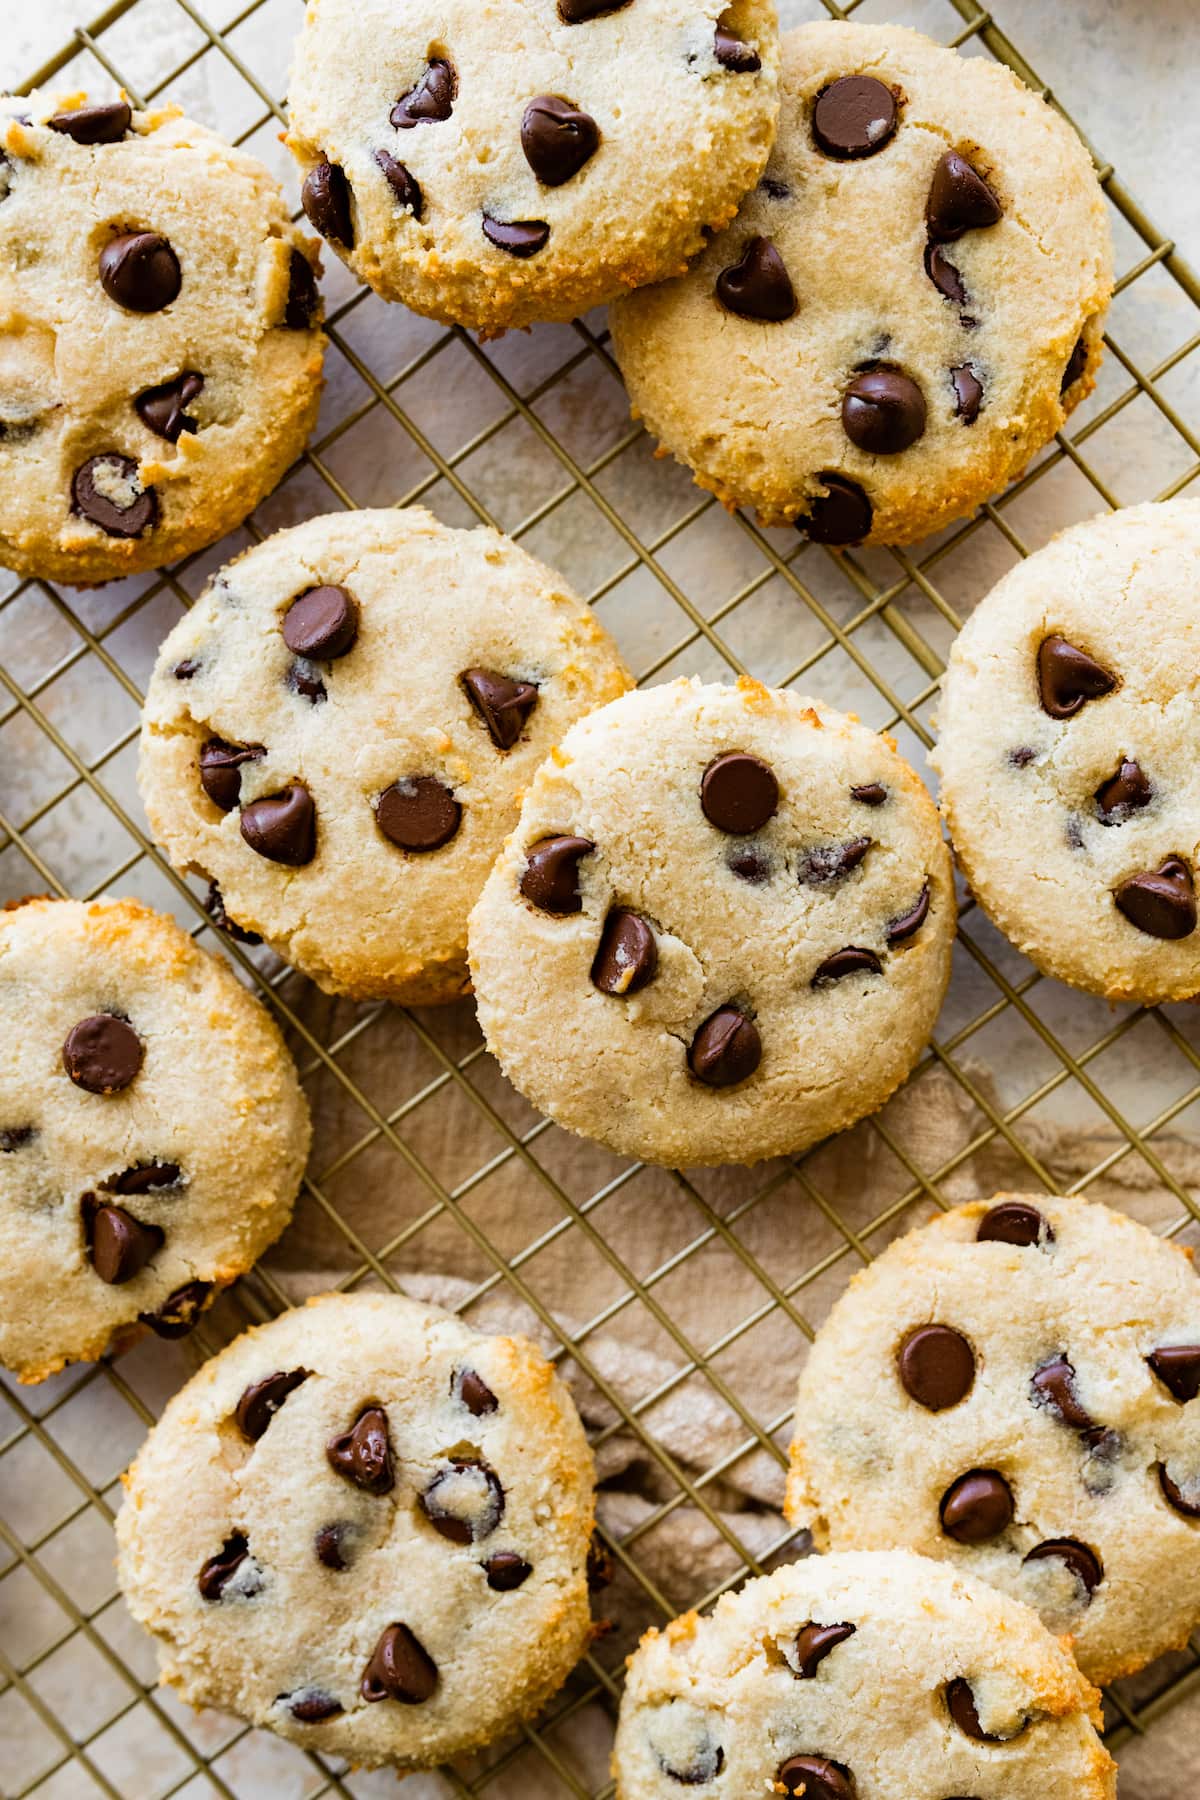 7.Whipped Cottage Cheese Chocolate Chip Cookies: 